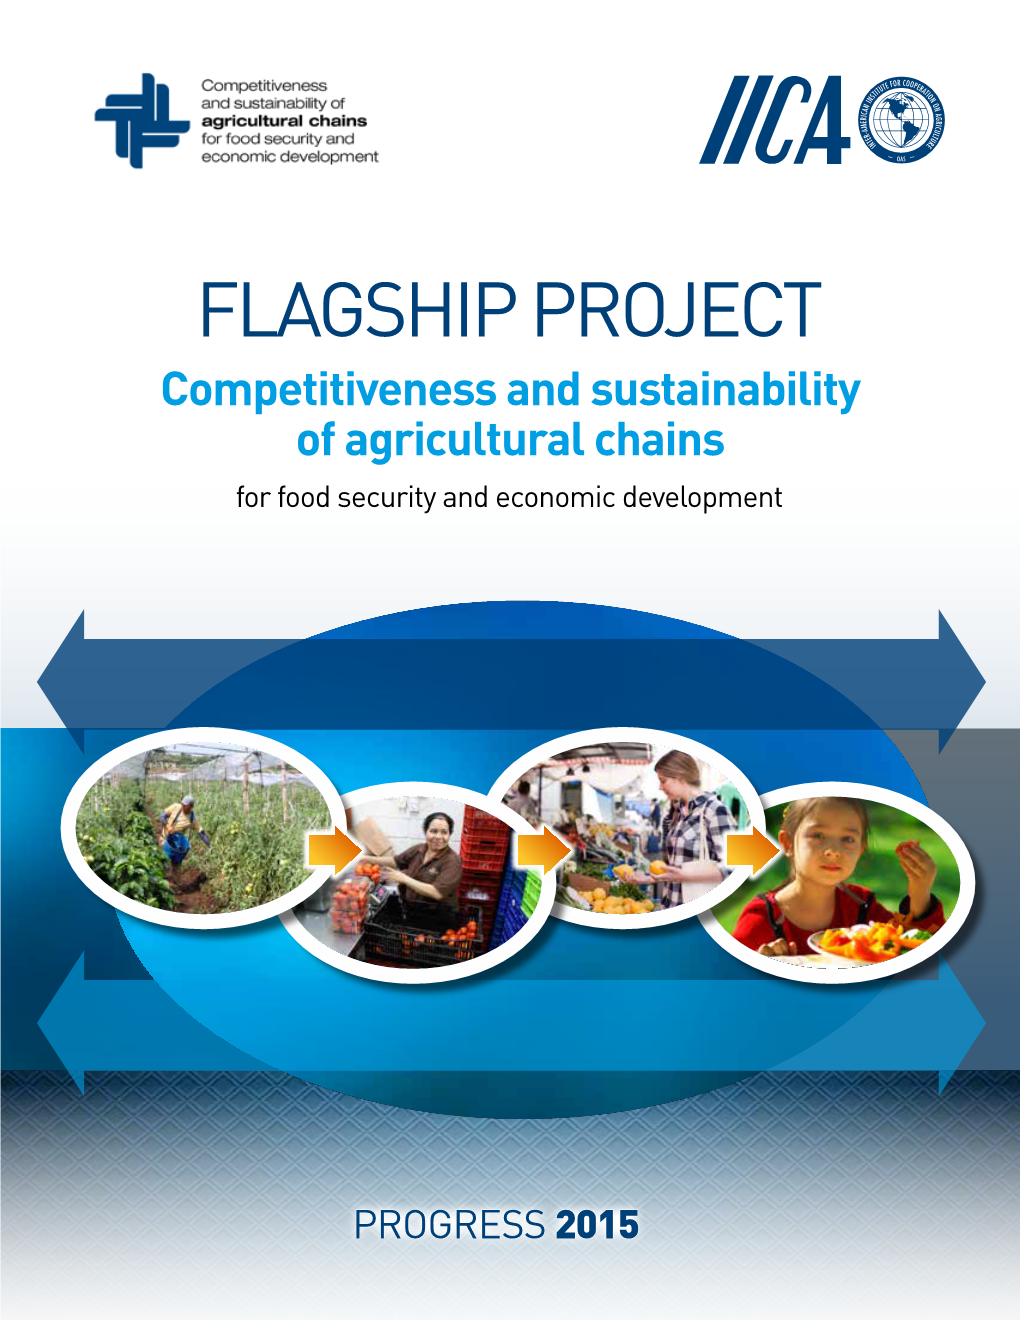 Flagship Project Competitiveness and Sustainability of Agricultural Chains for Food Security and Economic Development